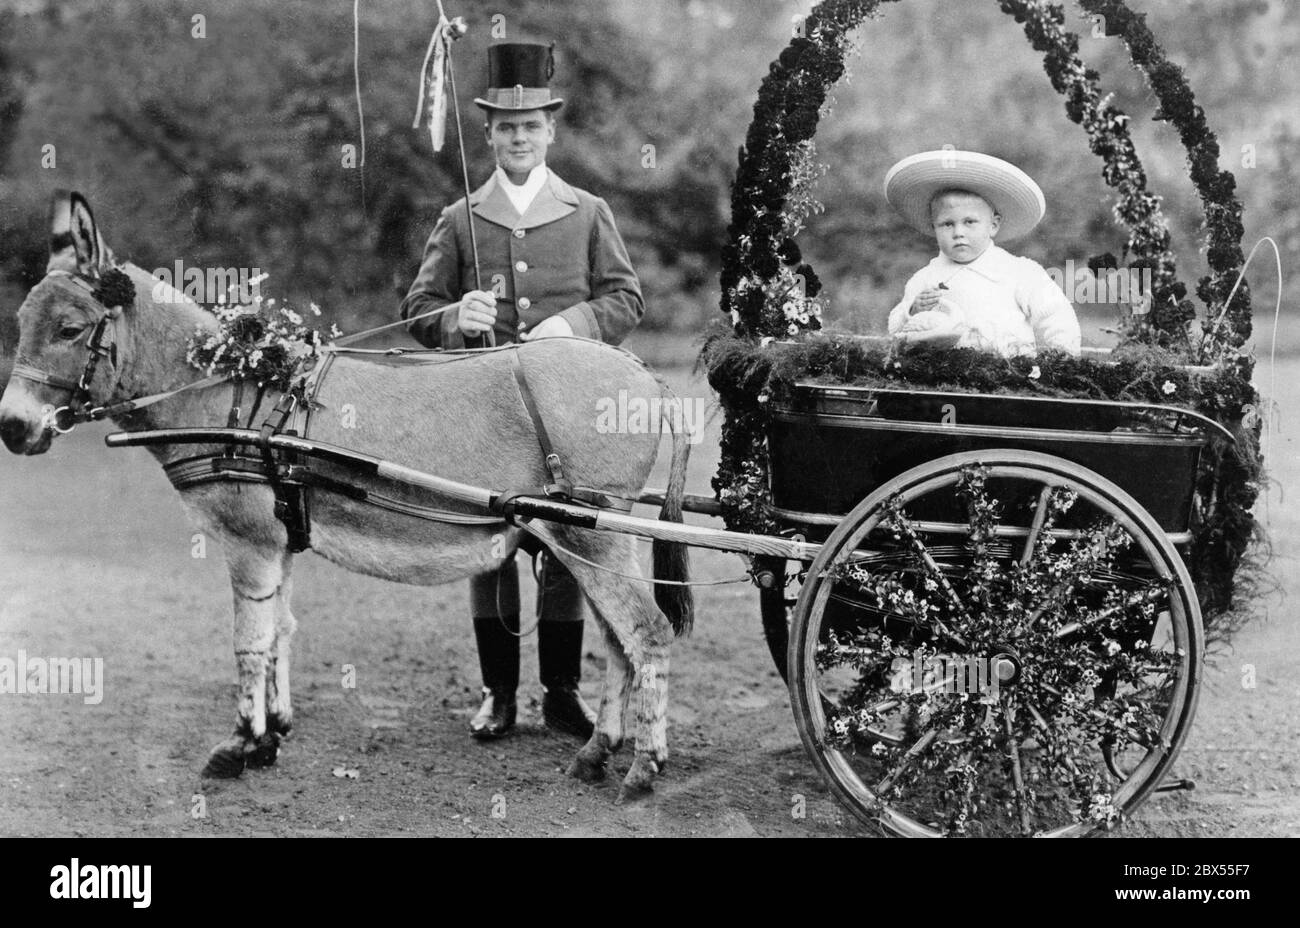 Hereditary Prince Friedrich Franz von Mecklenburg-Schwerin in a donkey cart decorated with flowers. Next to it stands the prince's servant and bodyguard. Stock Photo